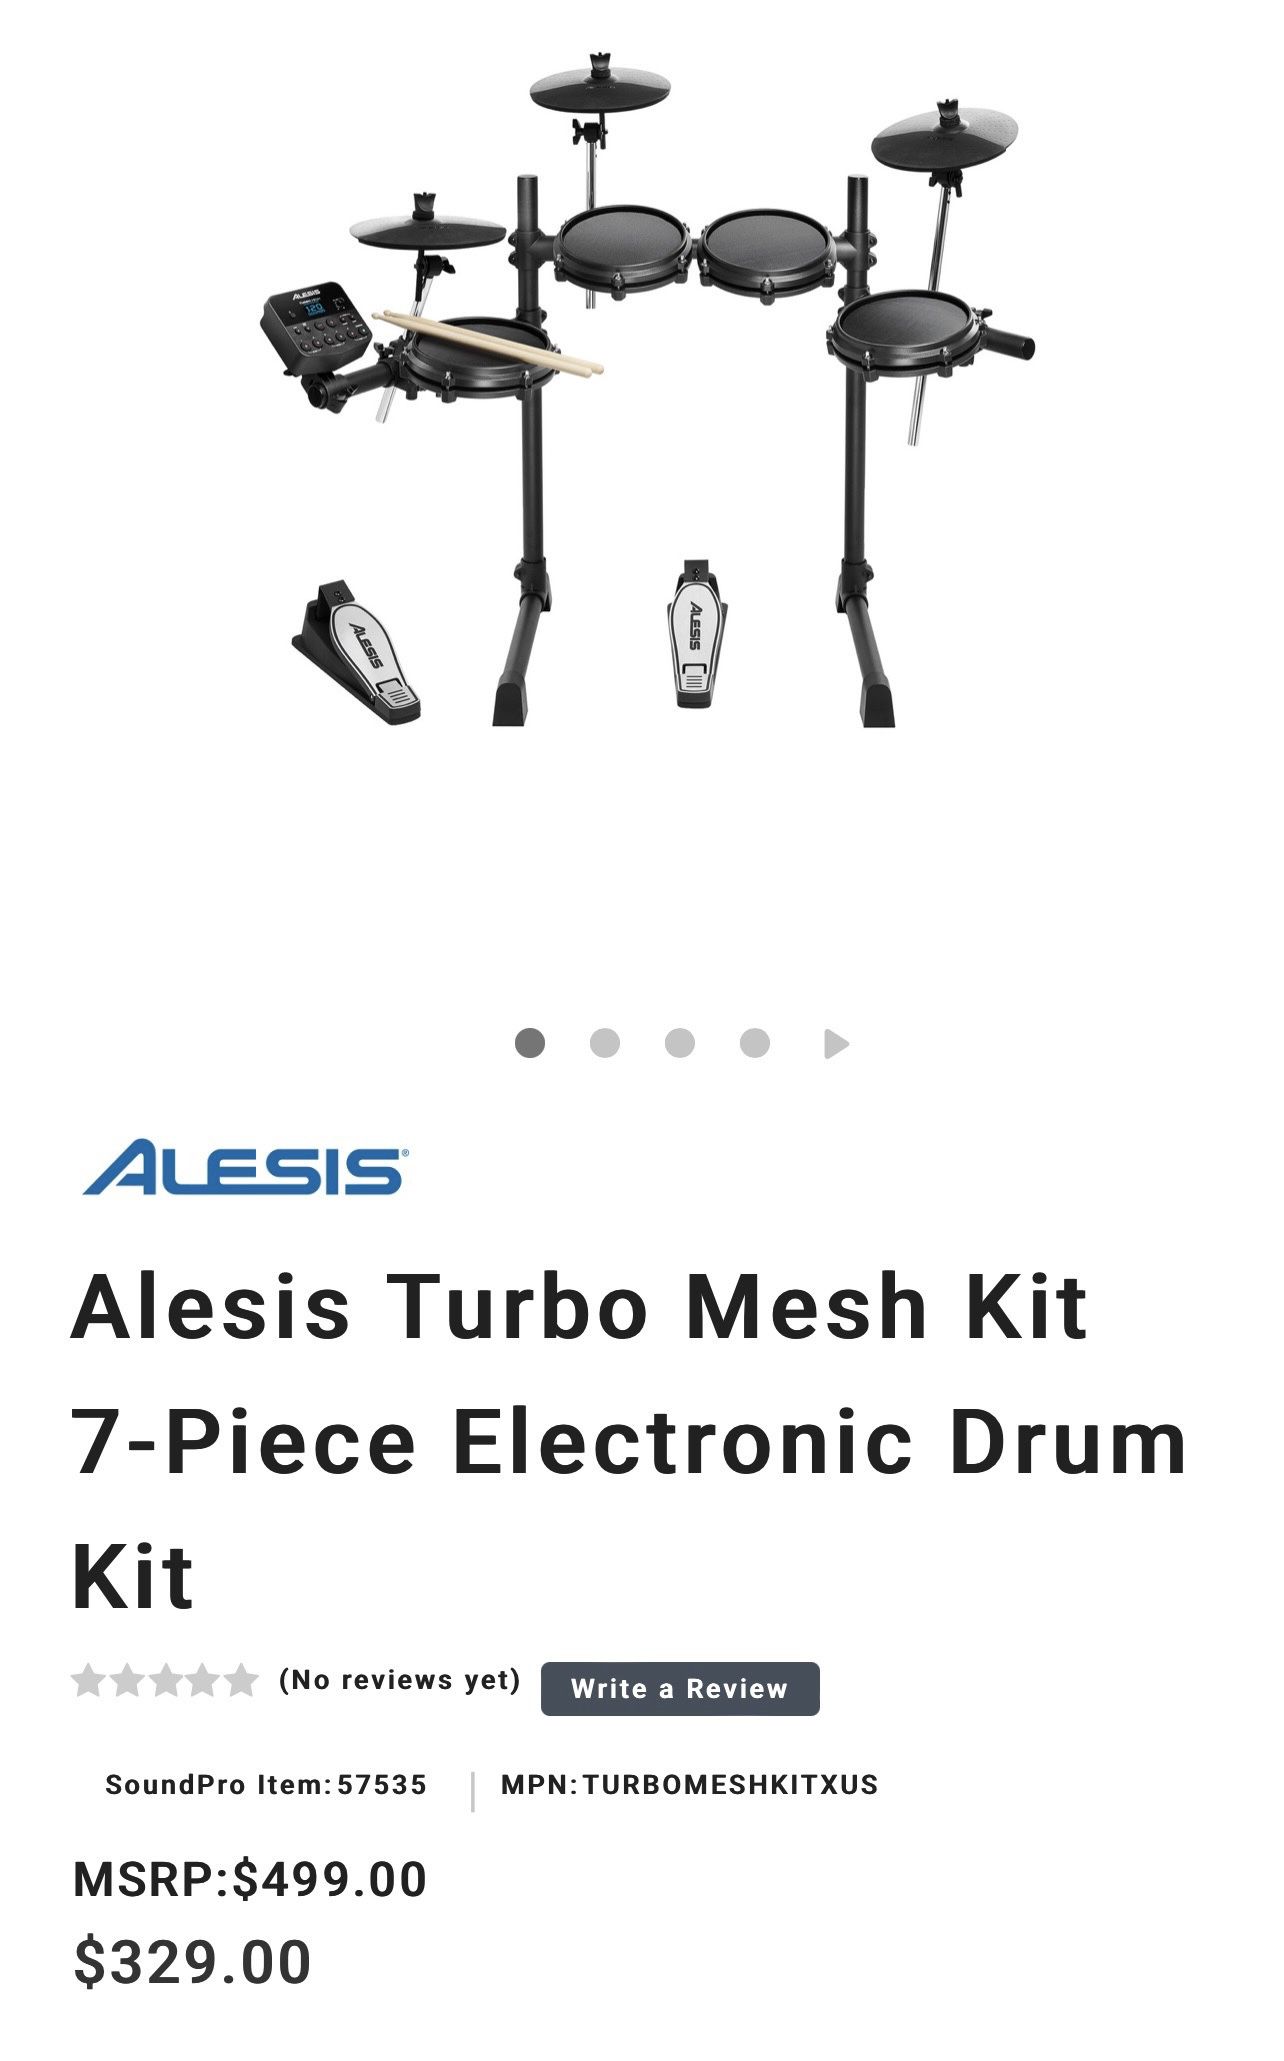 TURBO MESH KIT Seven-Piece Electronic Drum Kit with Mesh Heads